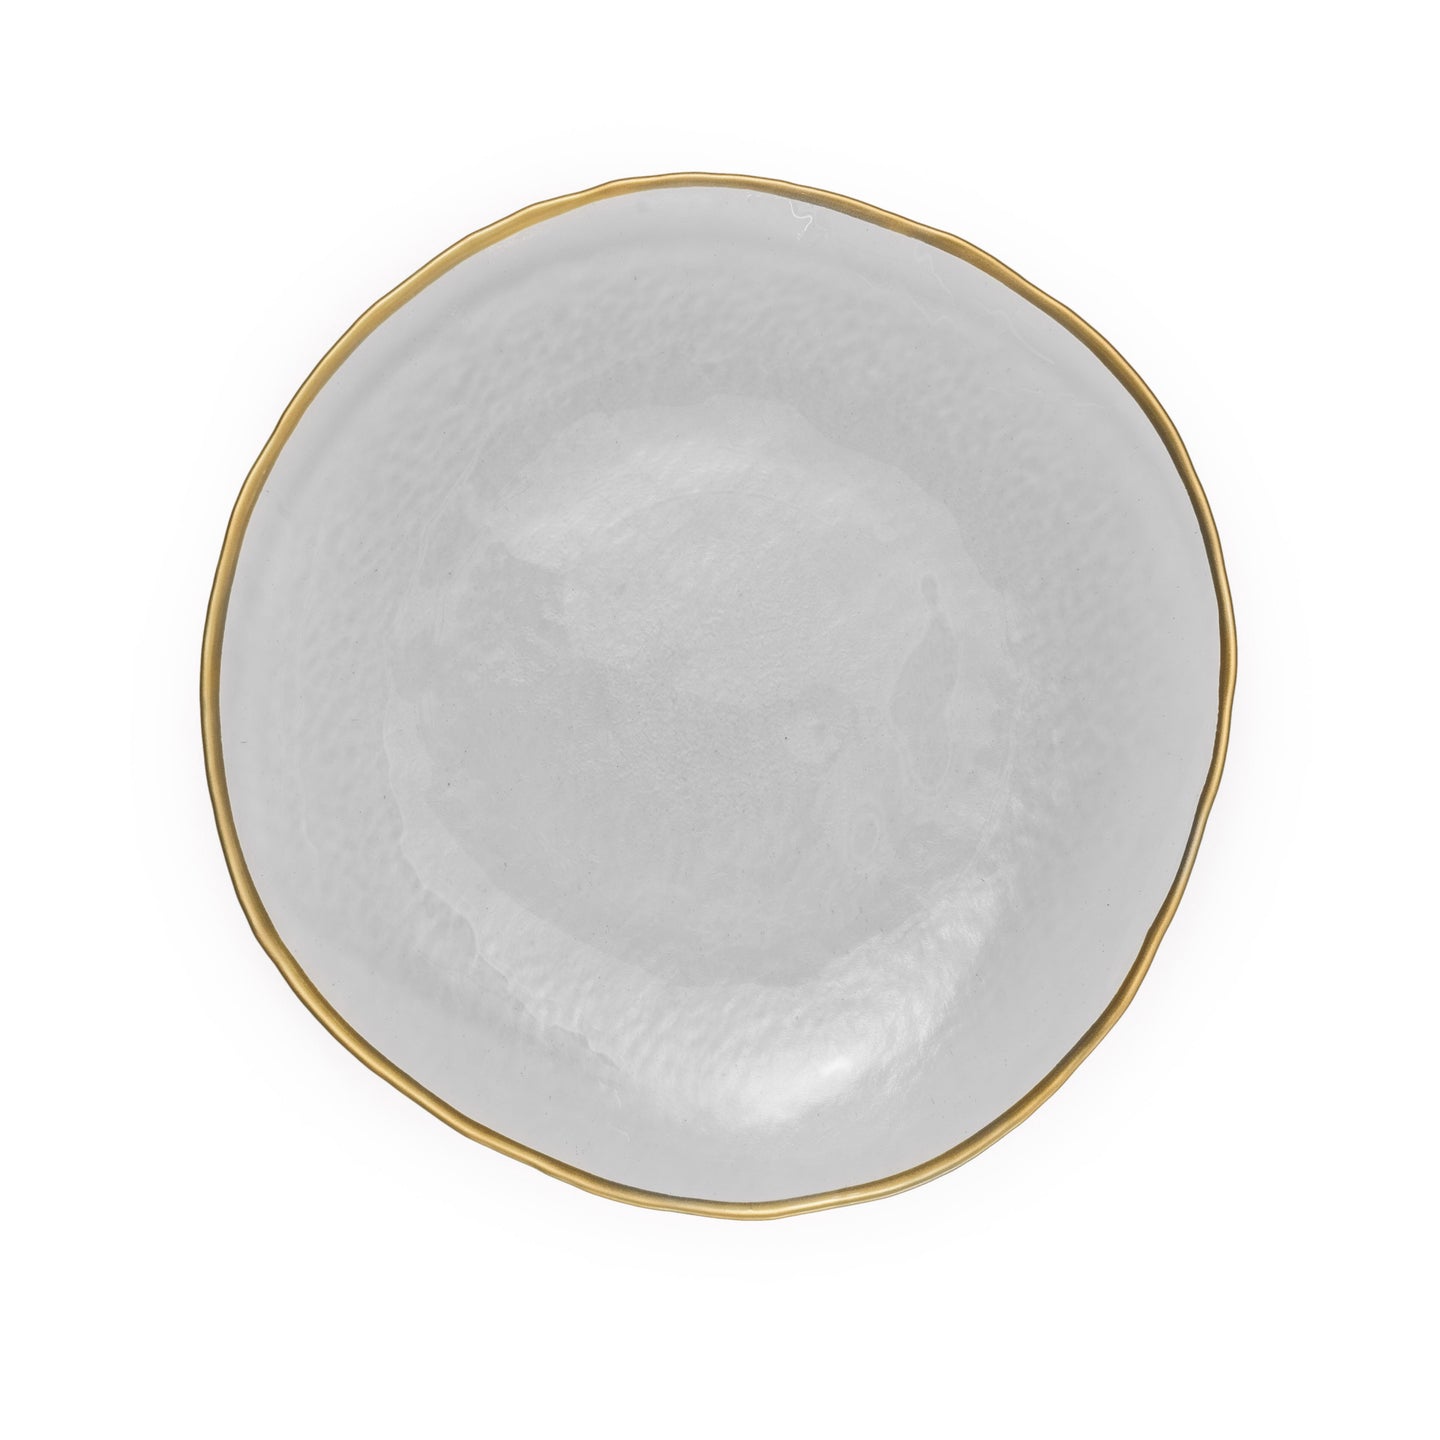 Set of 4 Dinner Plates with Gold Rim